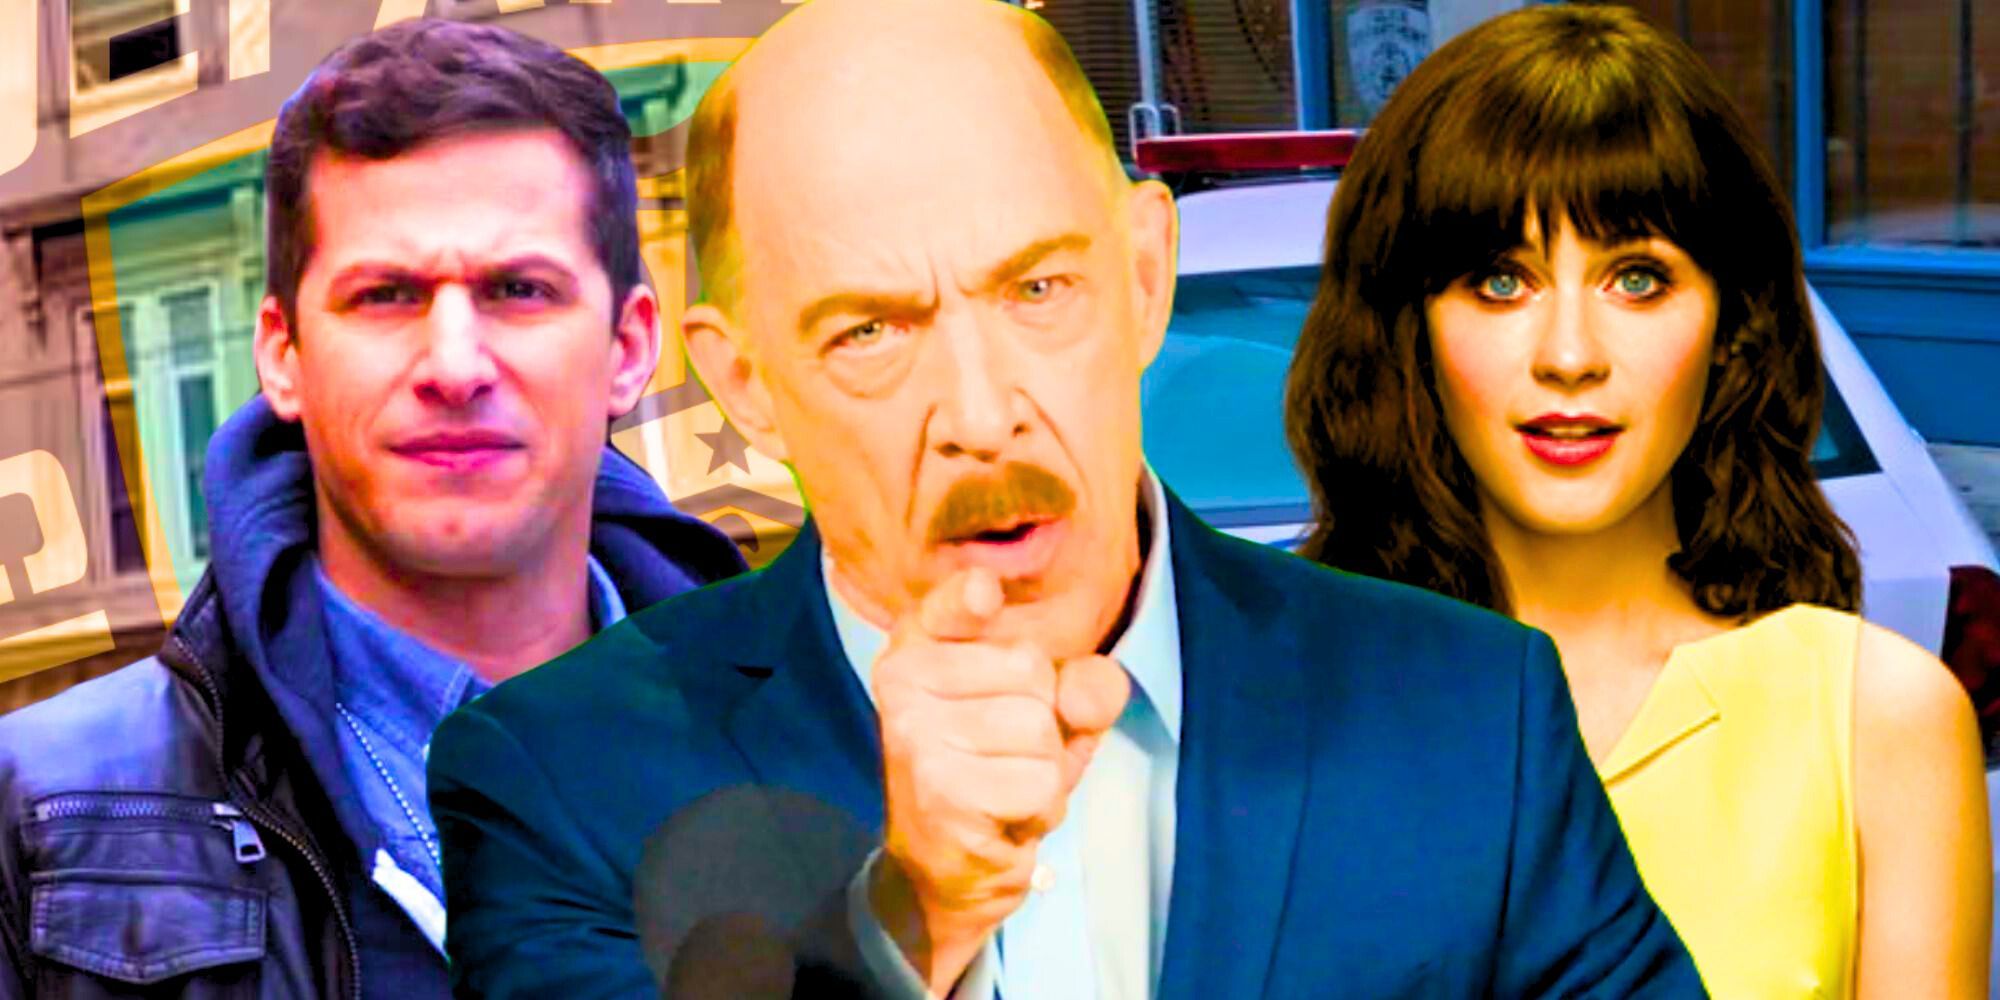 JK Simmons pointing at the screen with Andy Samberg as Jake Peralta and Zooey Deschanel as Jess Day behind him